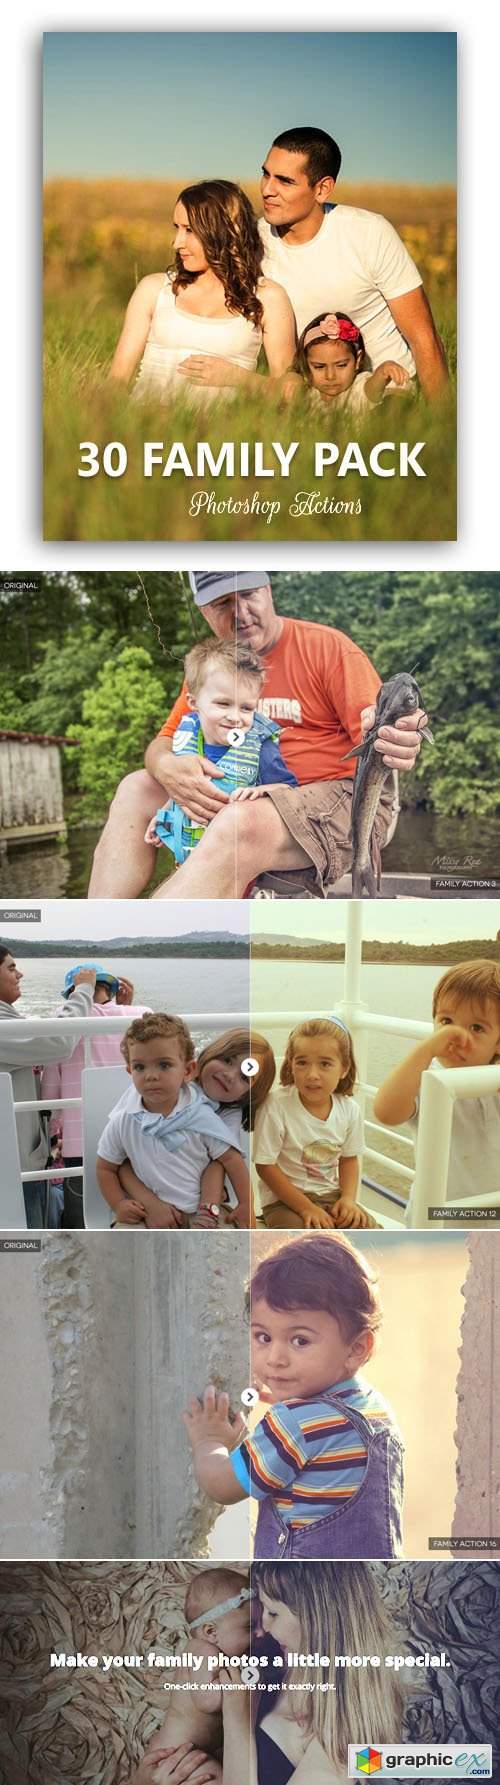 30 Photoshop Actions for Family Portraits